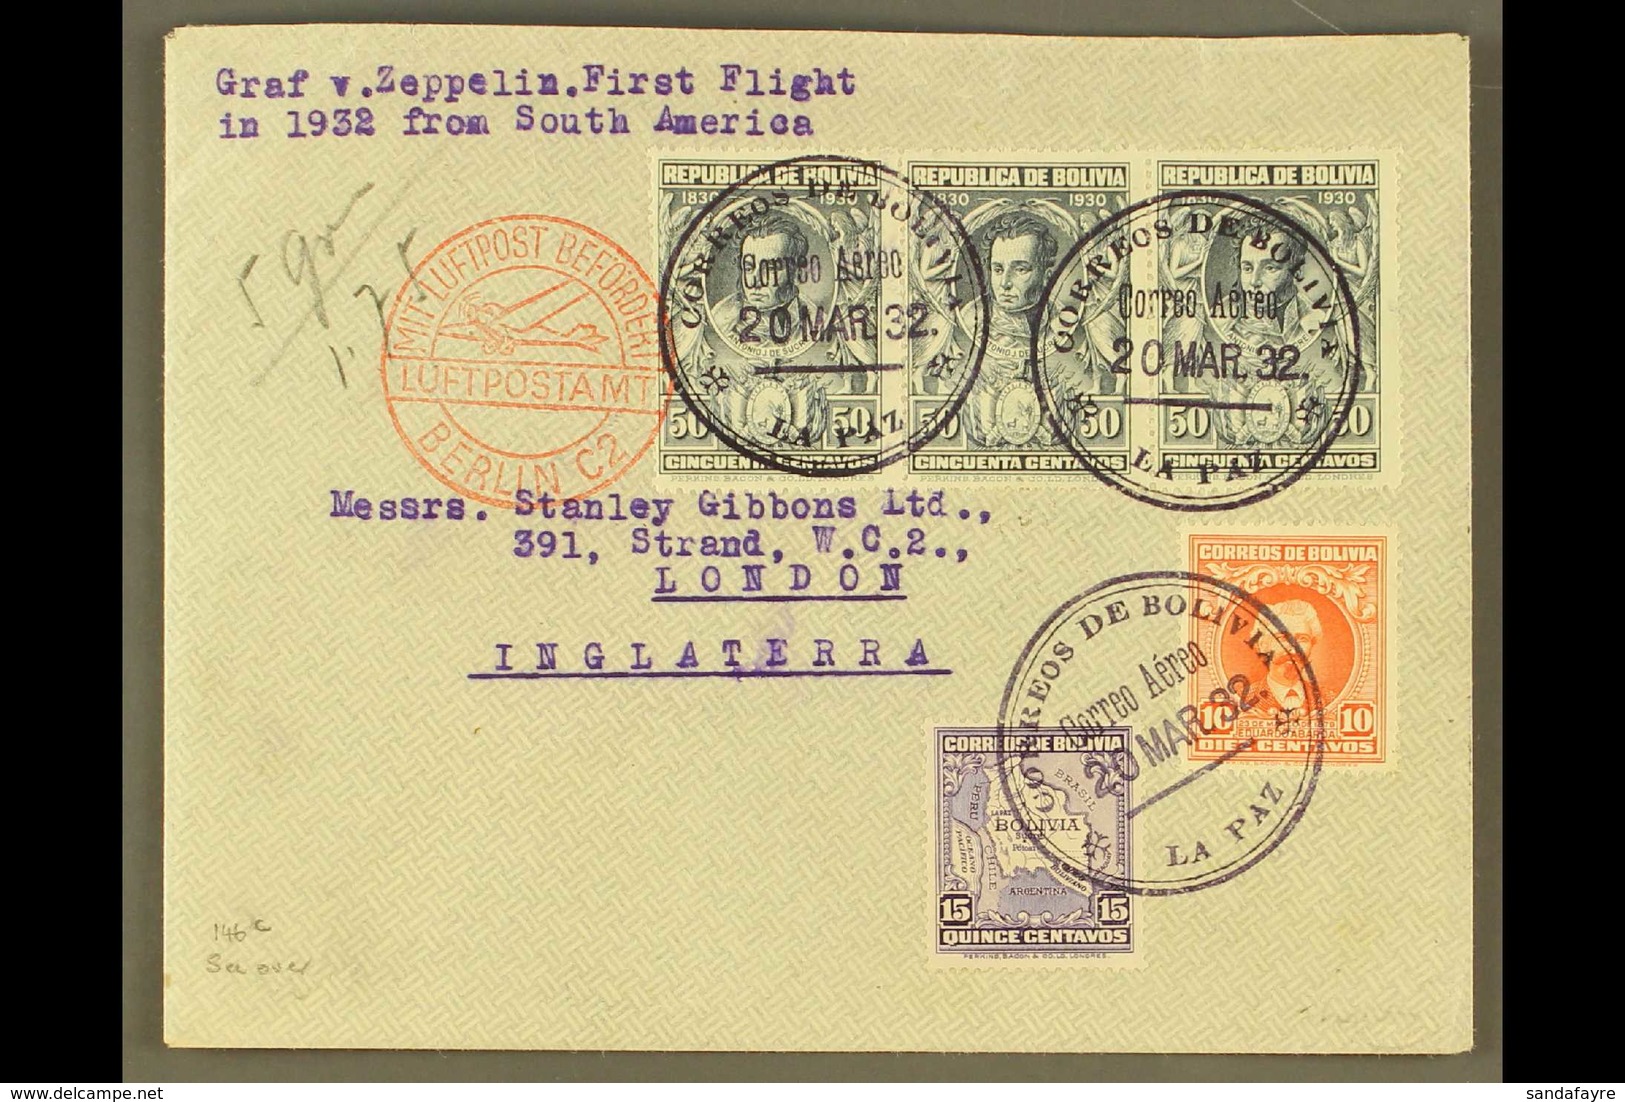 1932 1st SOUTH AMERICA - EUROPE ZEPPELIN FLIGHT, Cover To UK Franked Selection Of Bolivian Stamps Tied By La Paz Cds Can - Bolivia